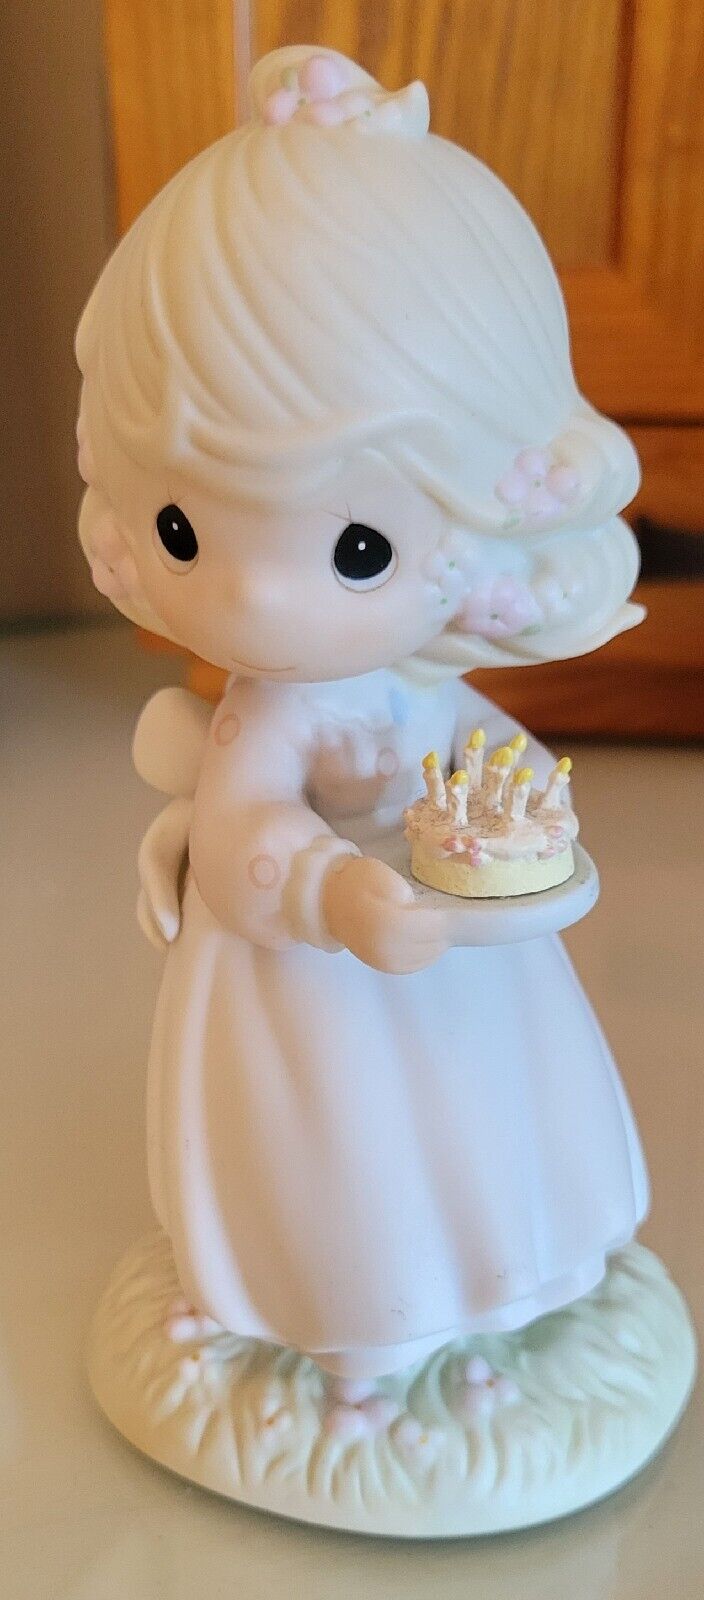 Precious Moments "May Your Birthday Be A Blessing" Cake #524301 Figurine ,1990